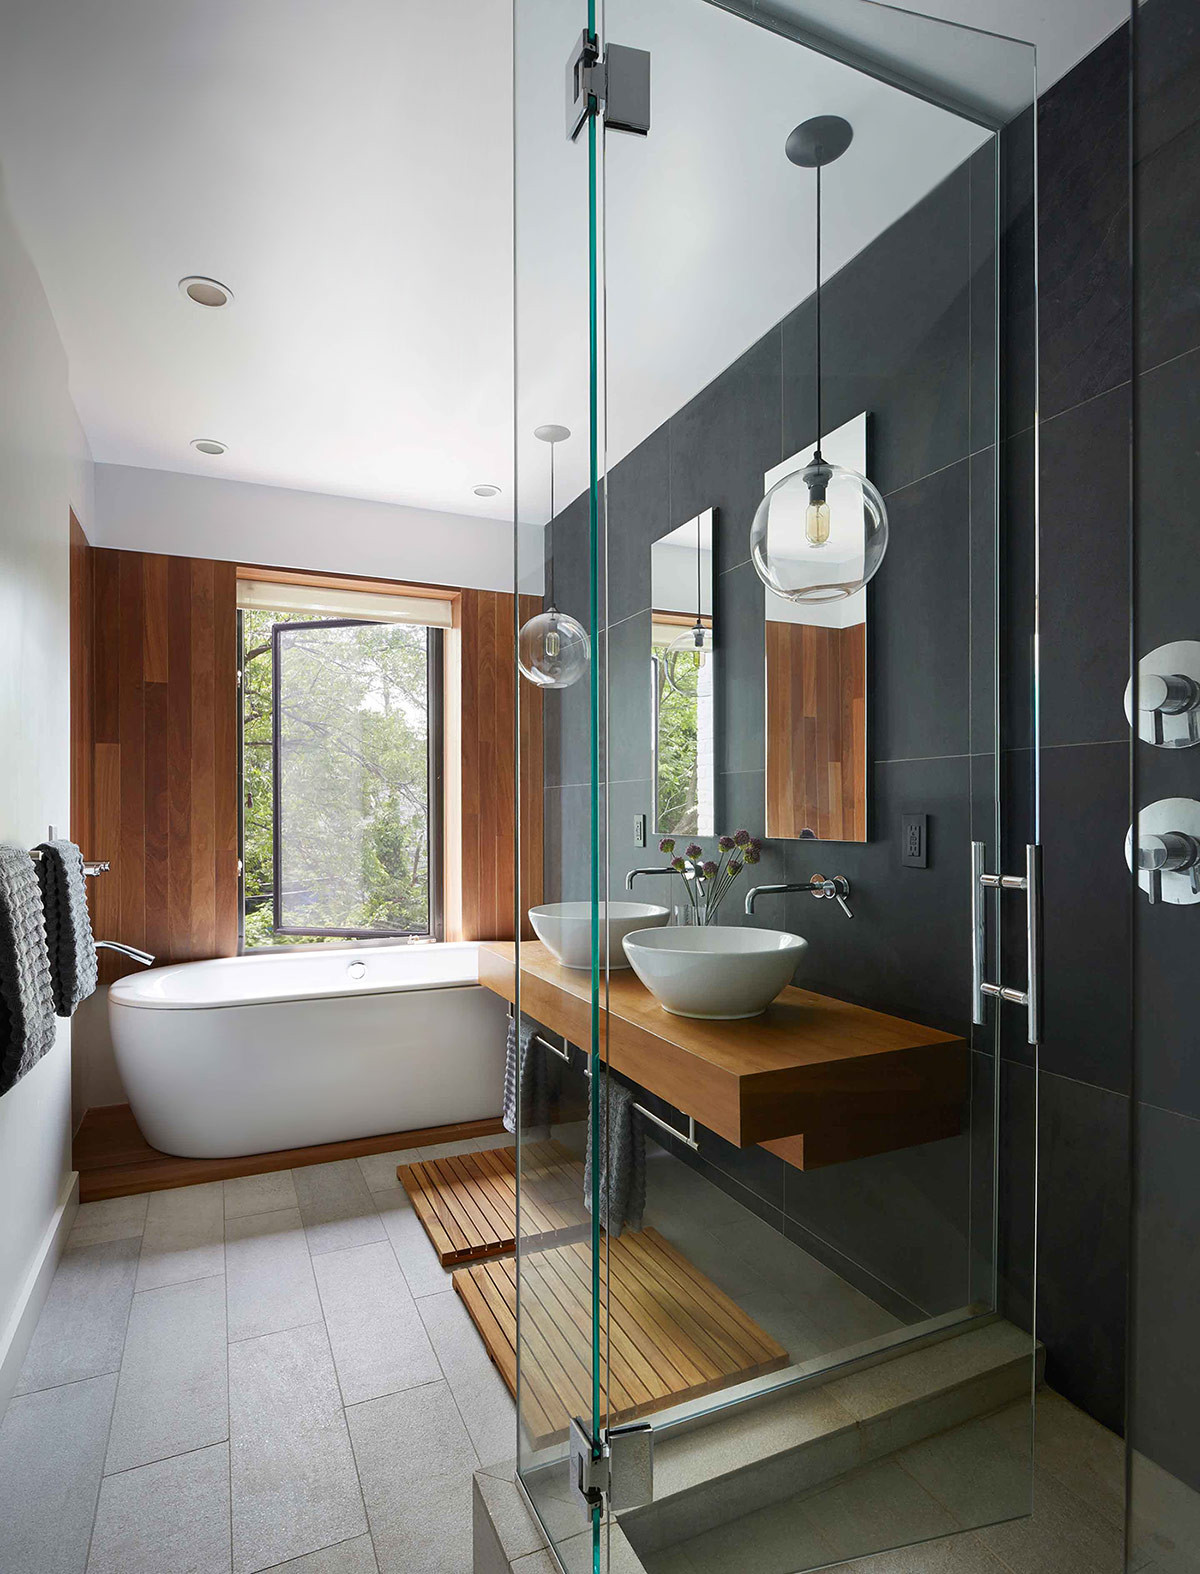 Bathroom Design Images
 Creating a Timeless Bathroom Look All You Need to Know